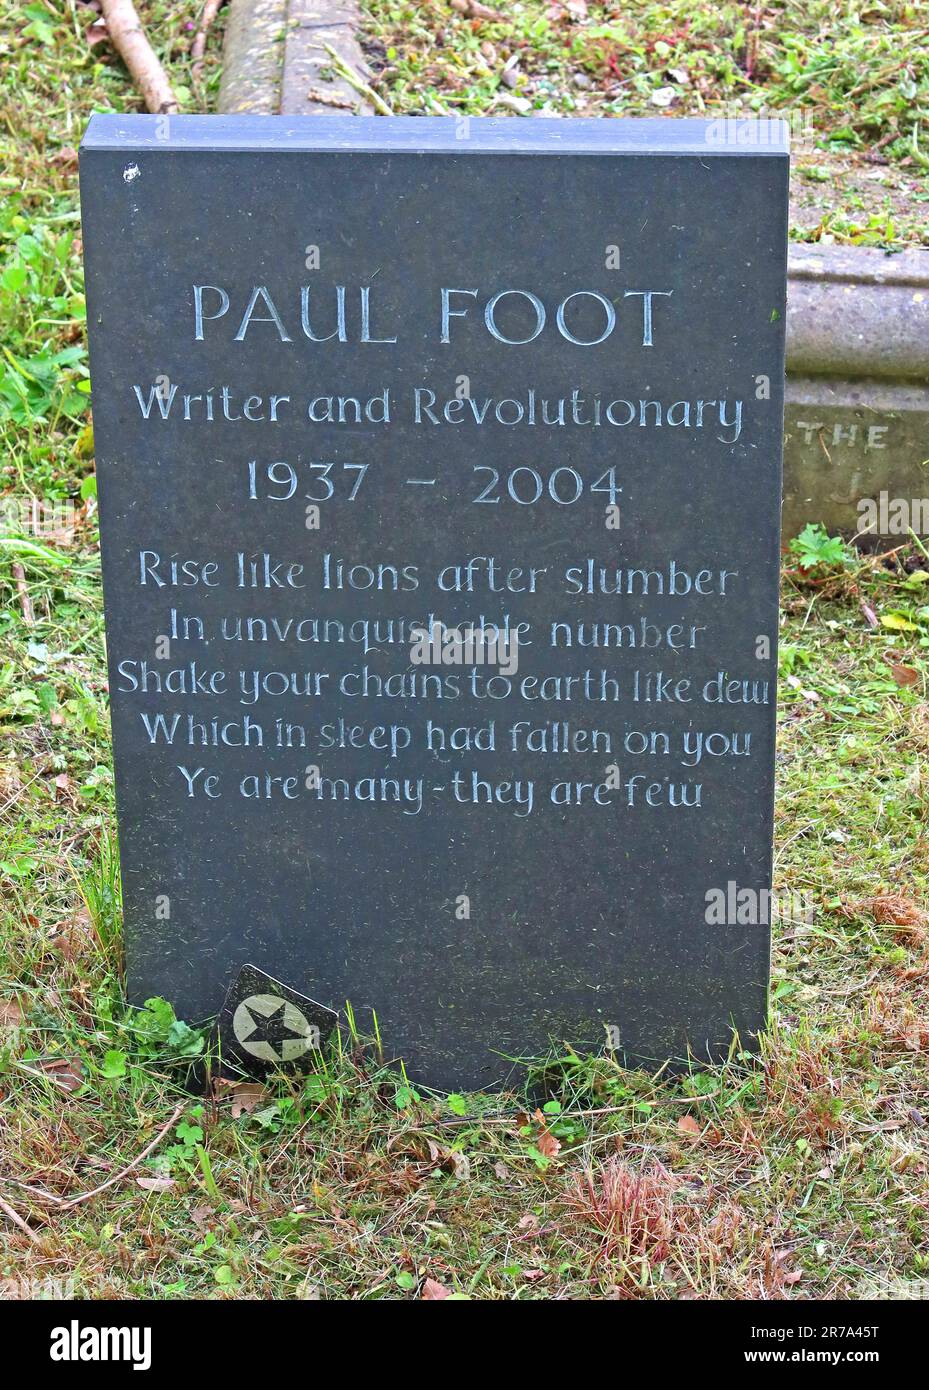 Grave of Paul Foot, writer and revolutionary, 1937-2004, buried in Highgate Cemetery, London, near Karl Marx's tomb, Swain's Lane, N6 6PJ Stock Photo